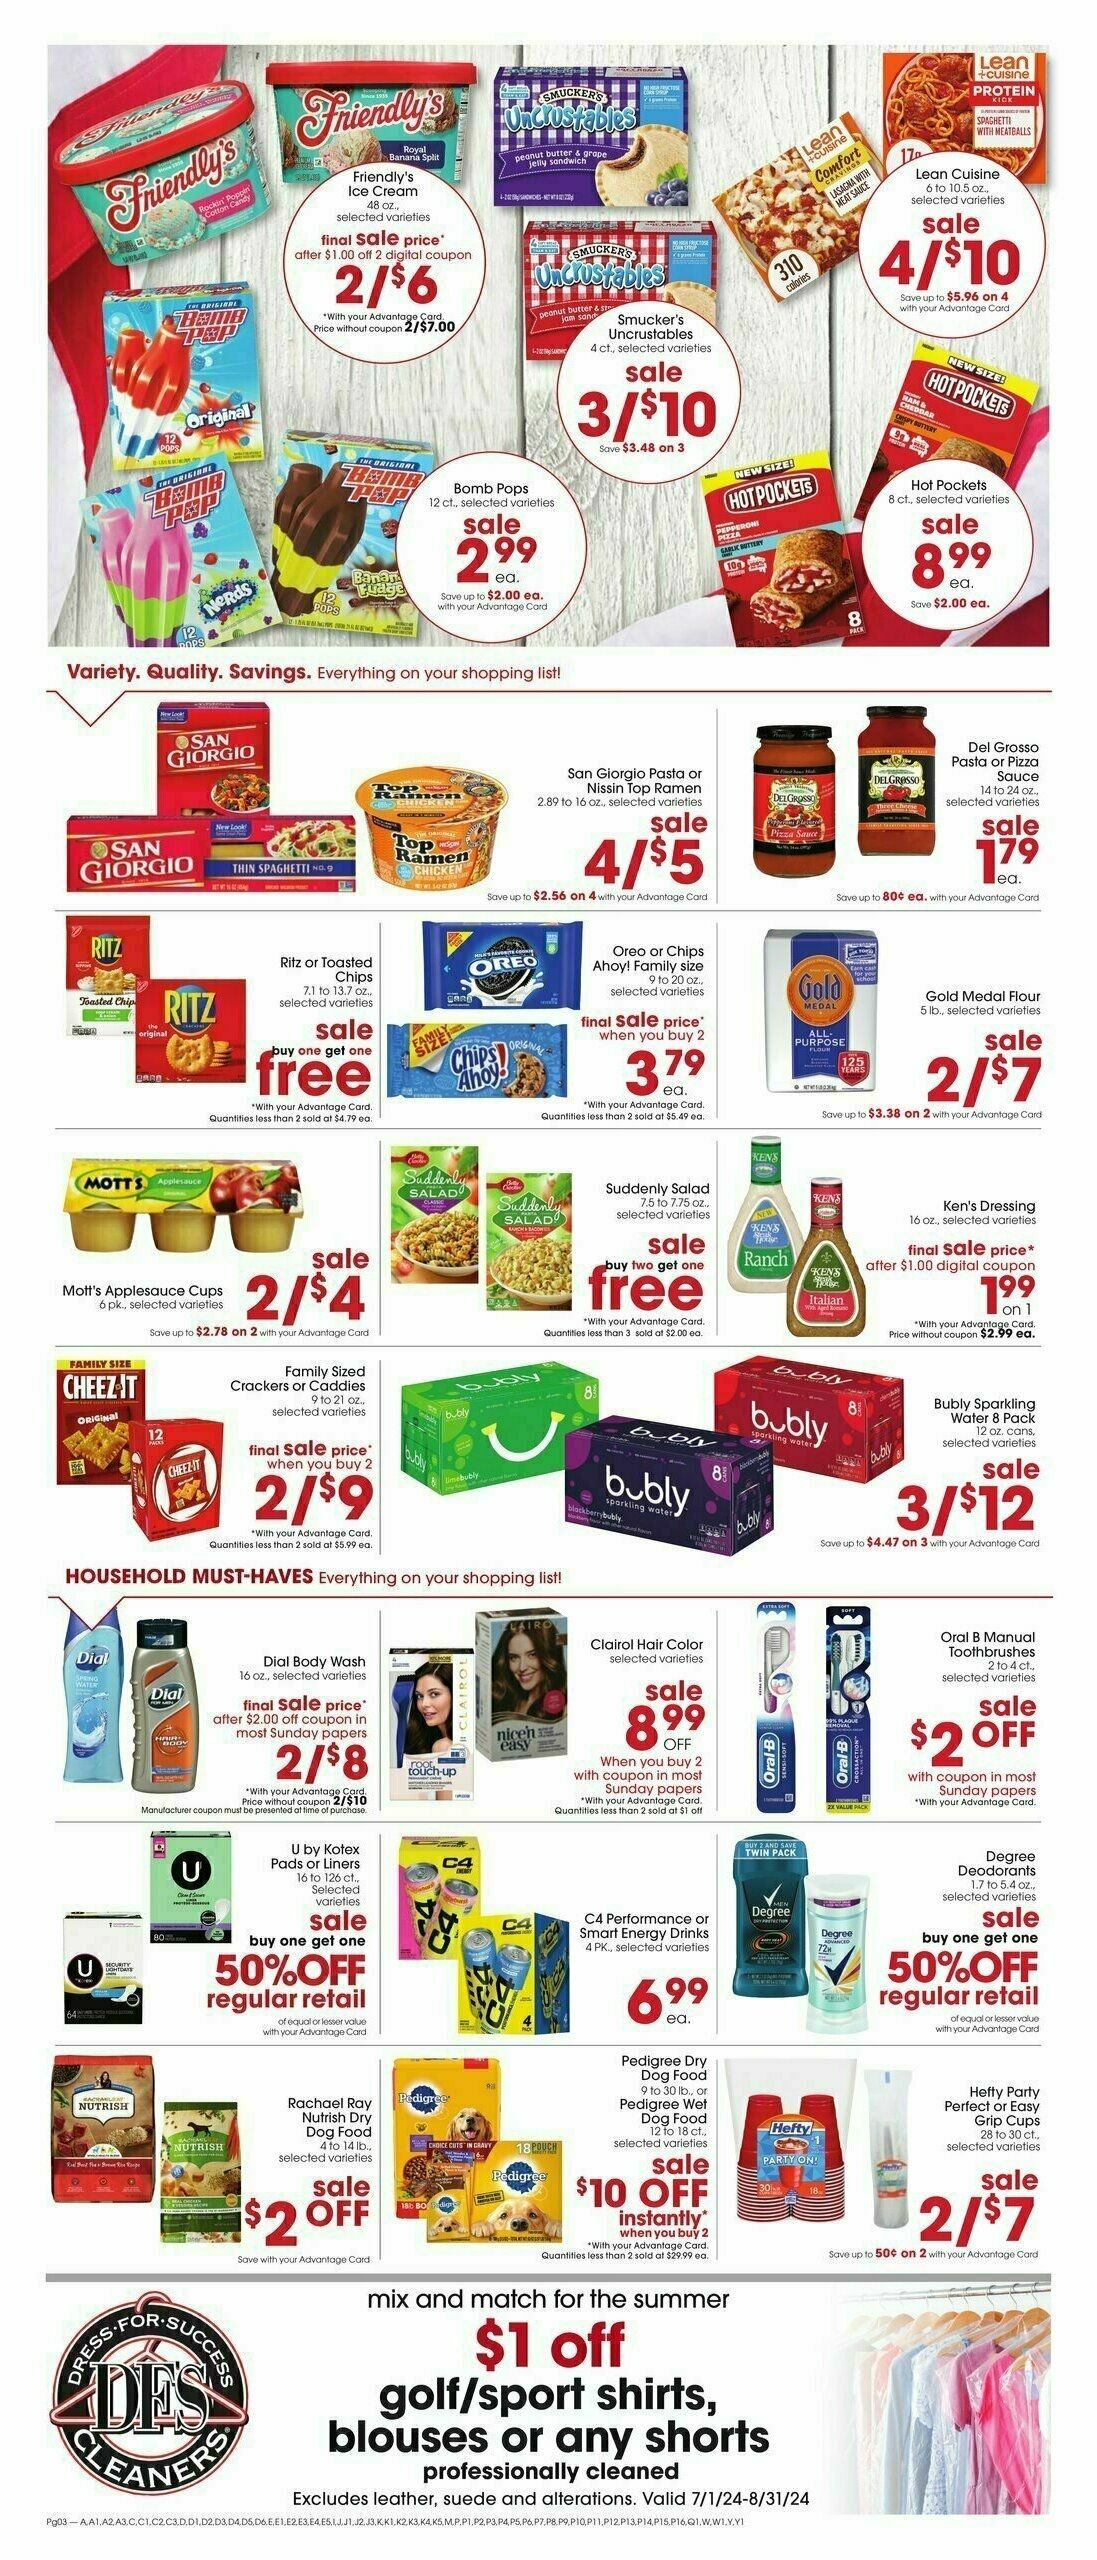 Giant Eagle Weekly Ad from July 4